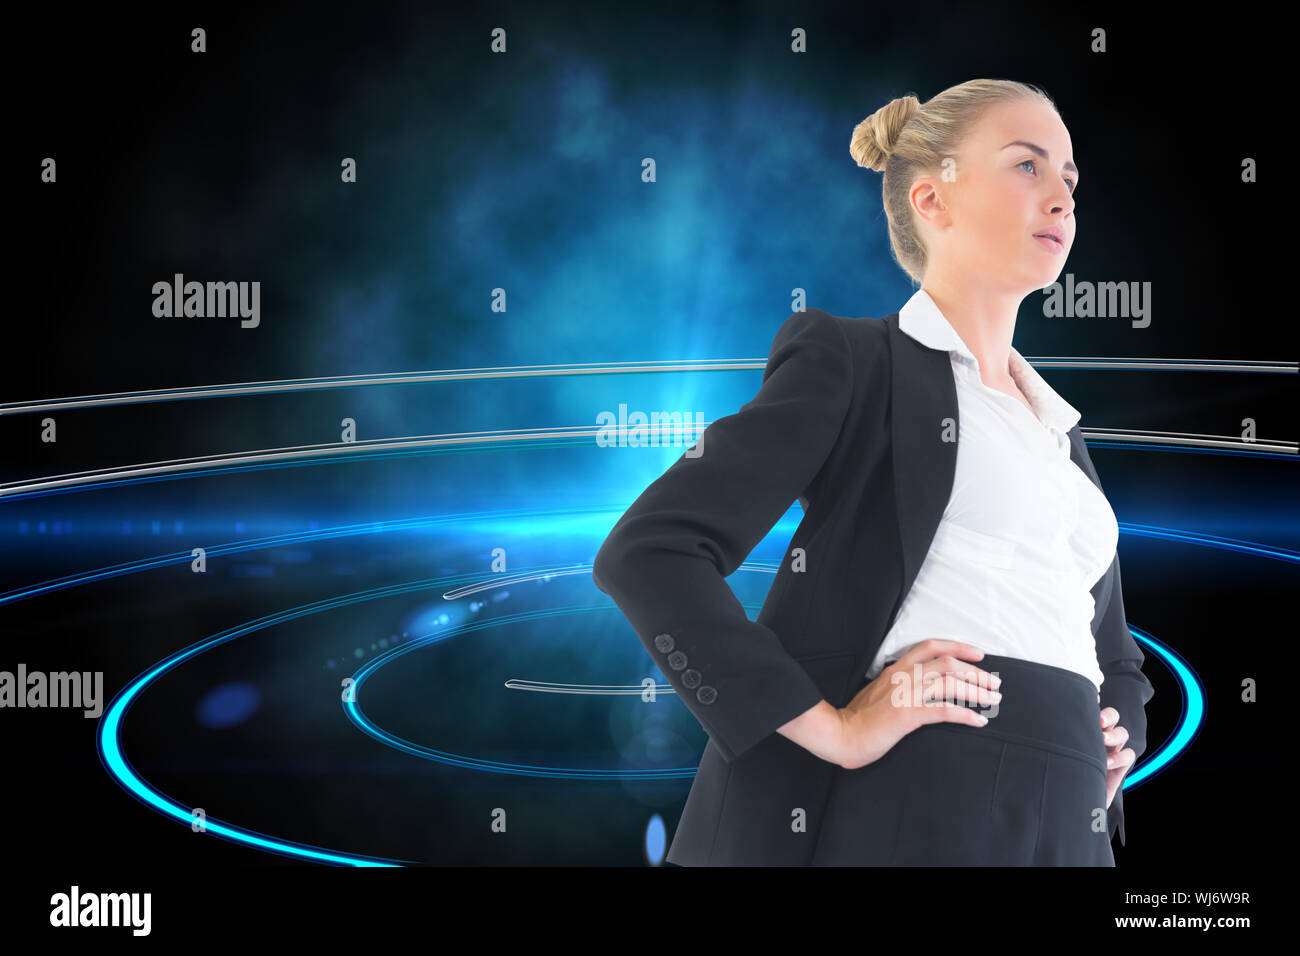 Composite image of blonde businesswoman standing with hands on hips Stock Photo